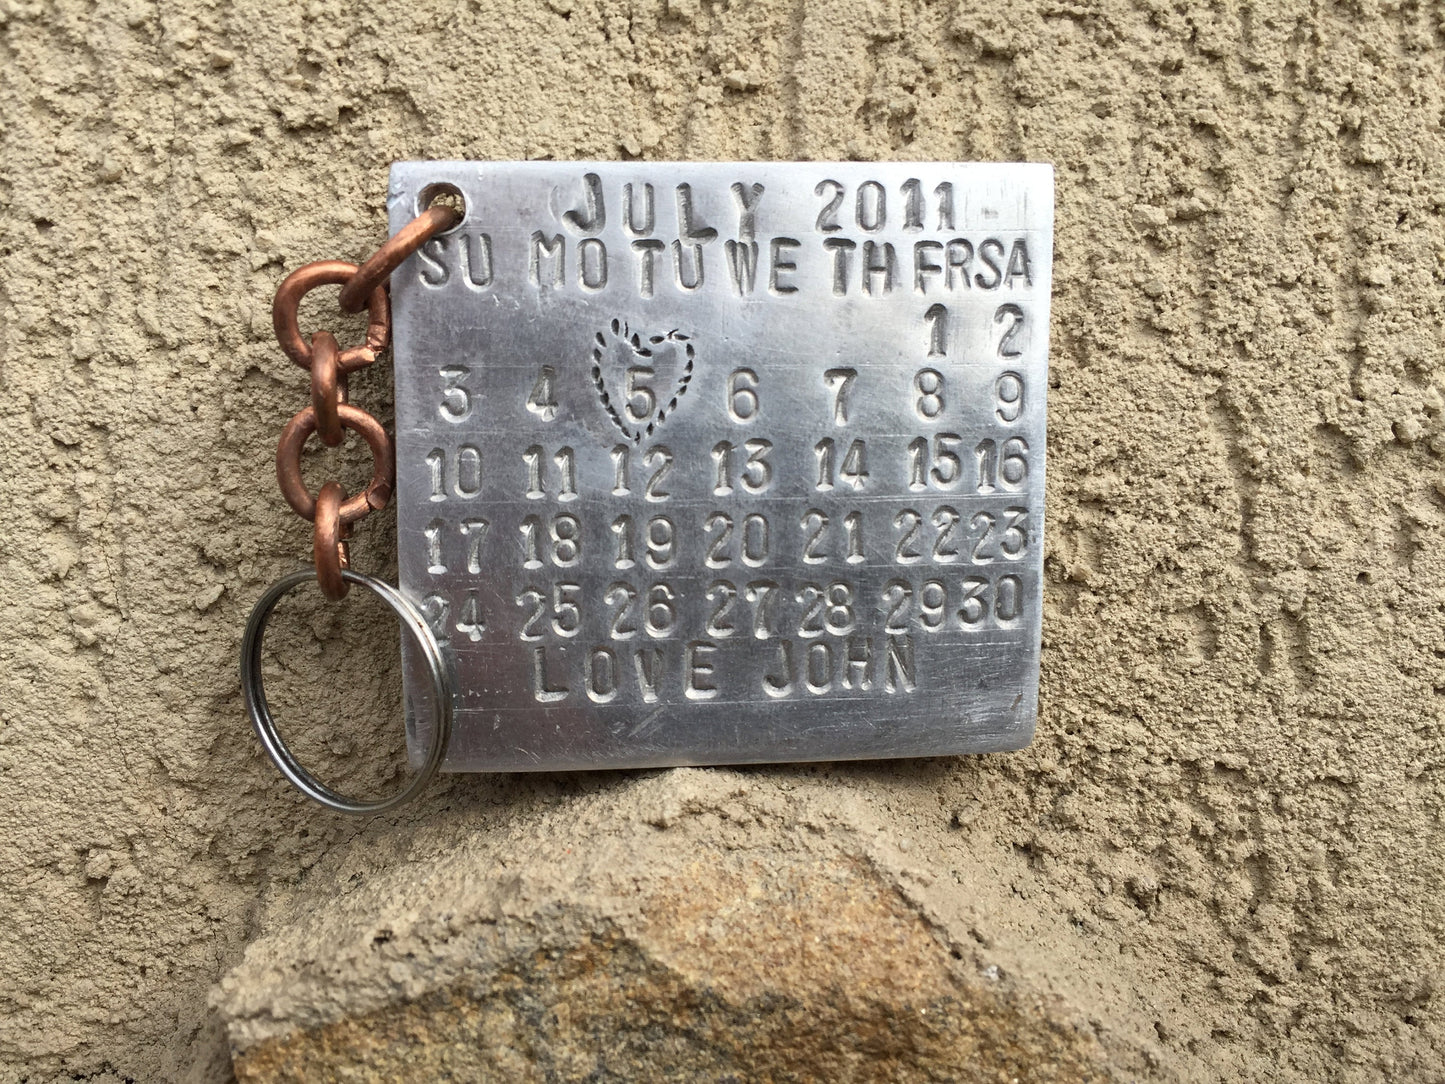 10th wedding anniversary, aluminium gift, calendar, keyring, save the date, special day, birthday gift, keychain, gift for partner, 10 years